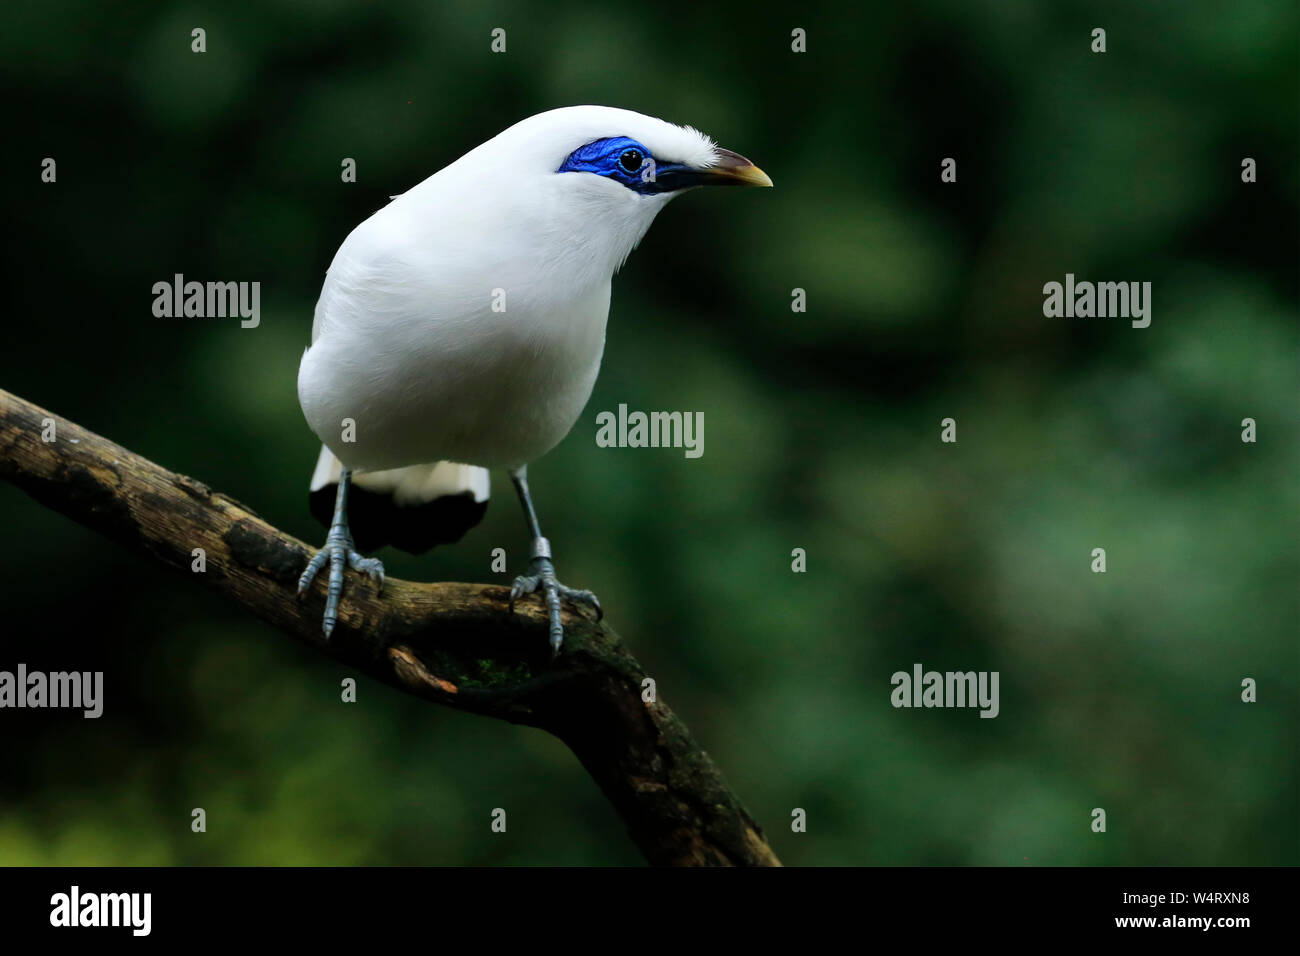 Bird perched on a branch, Indonesia Stock Photo